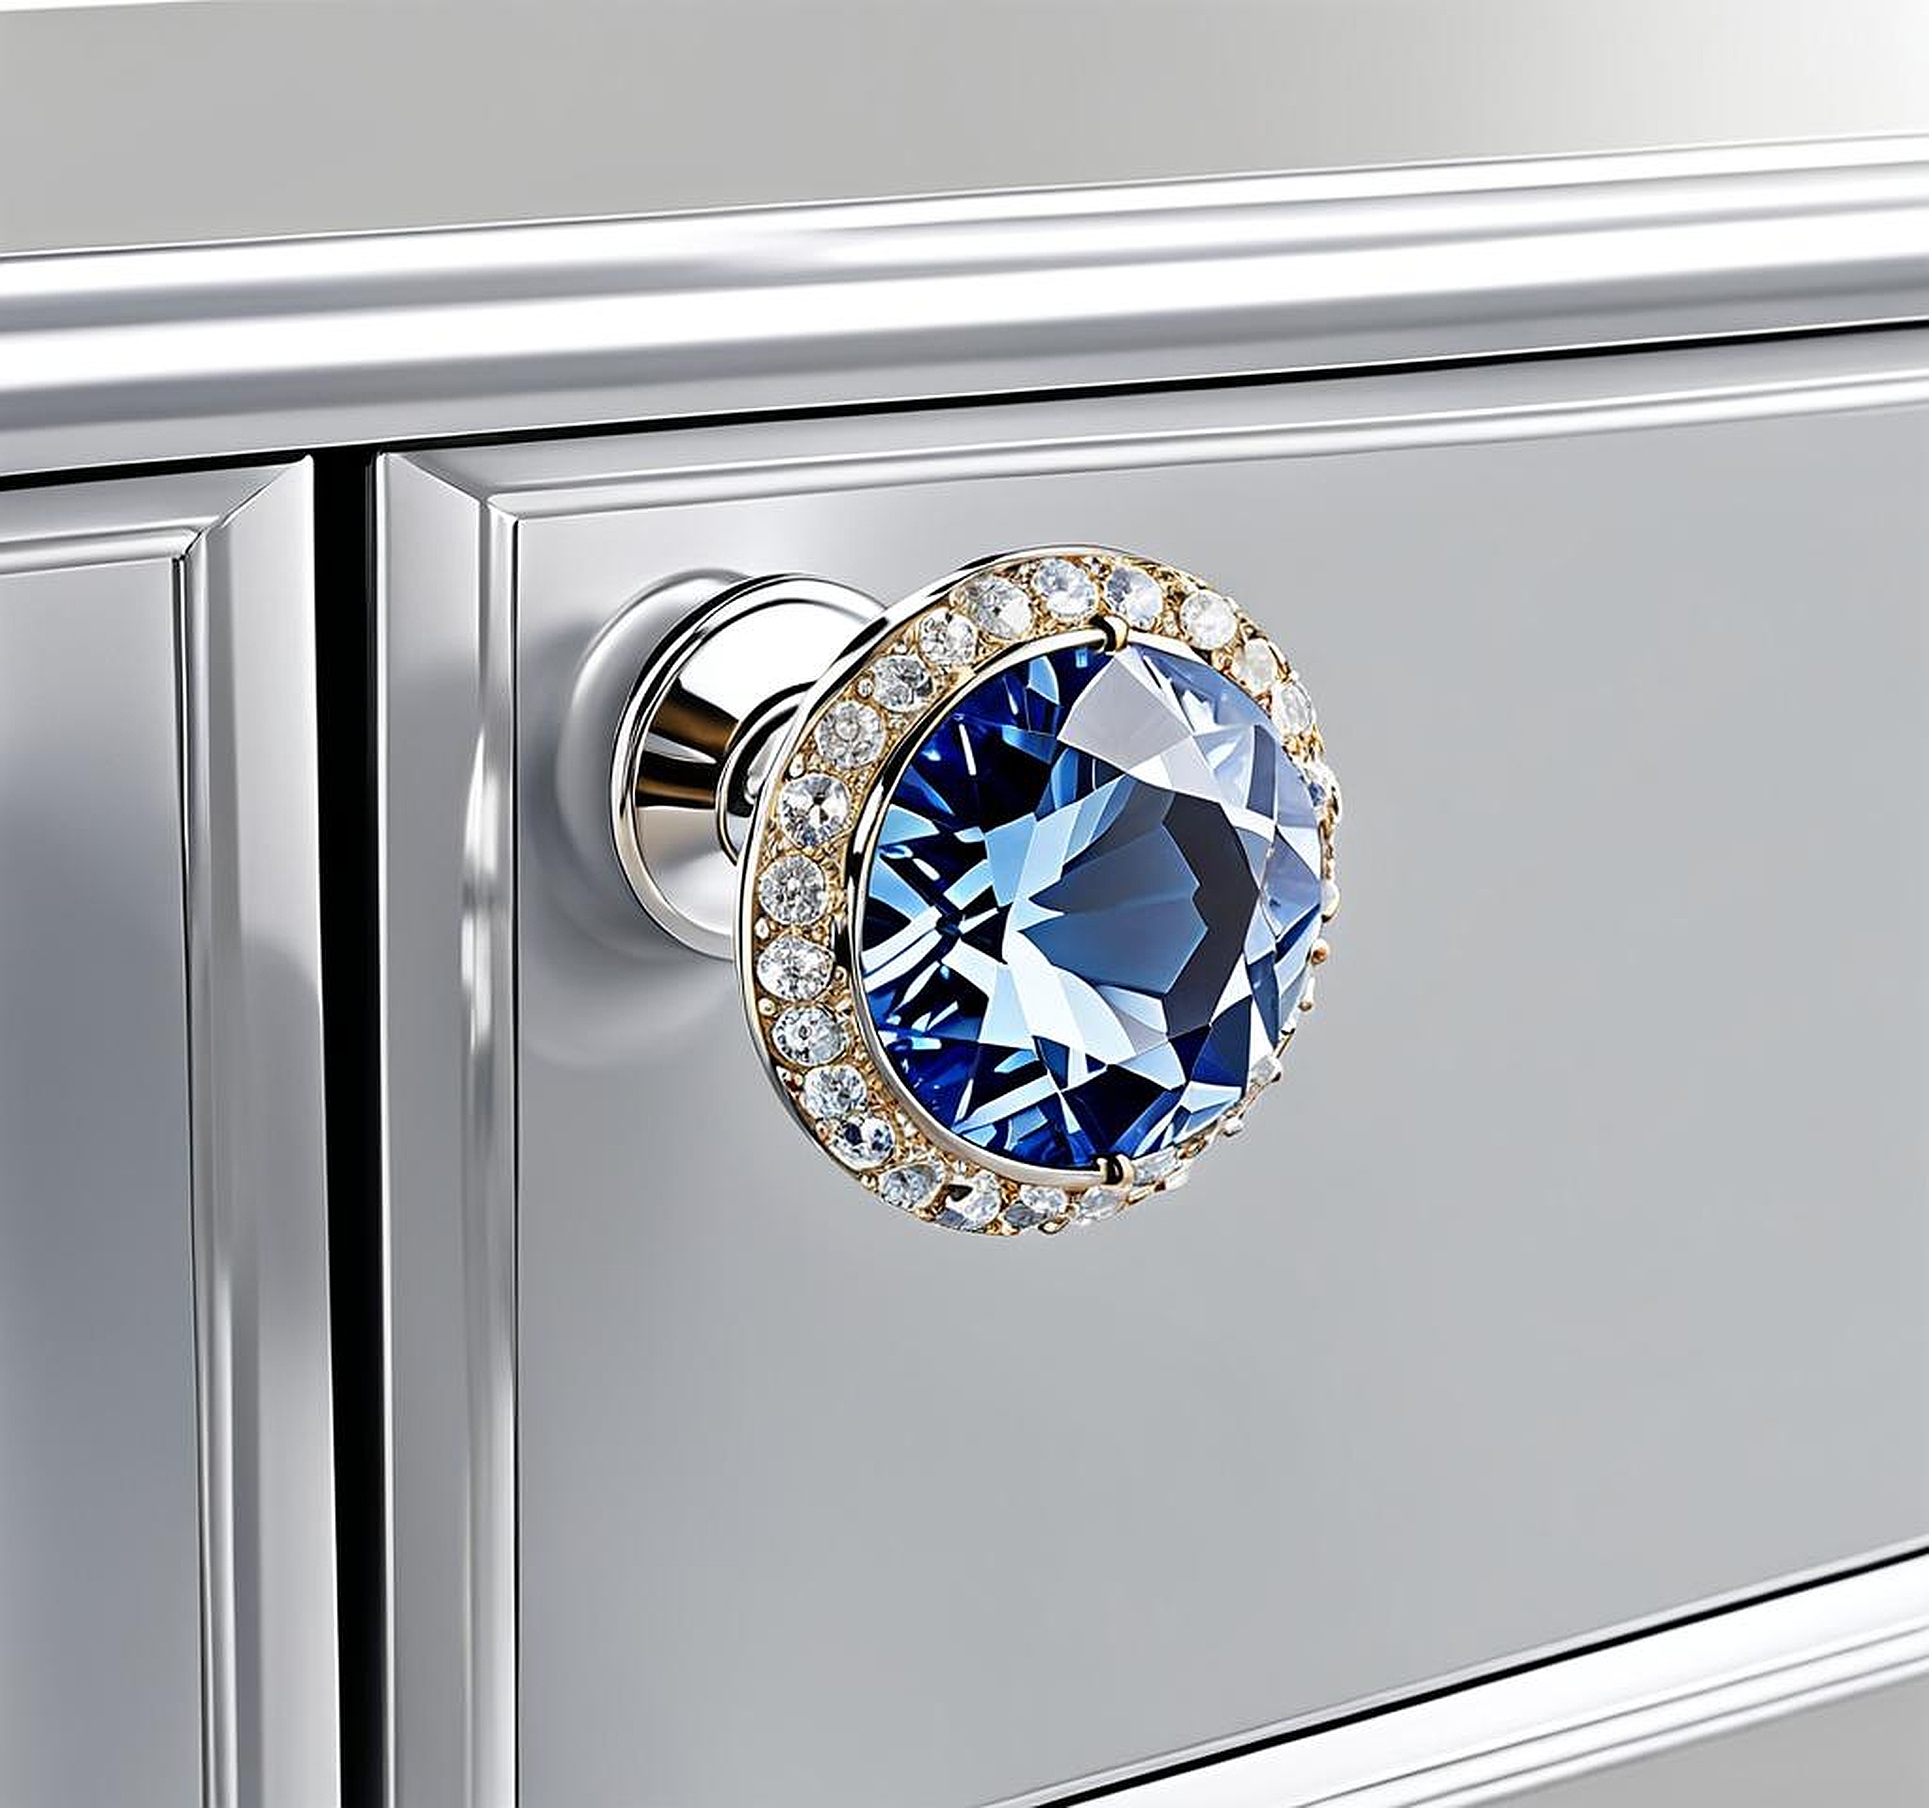 Swarovski Crystal Drawer Pulls for a Touch of Opulence